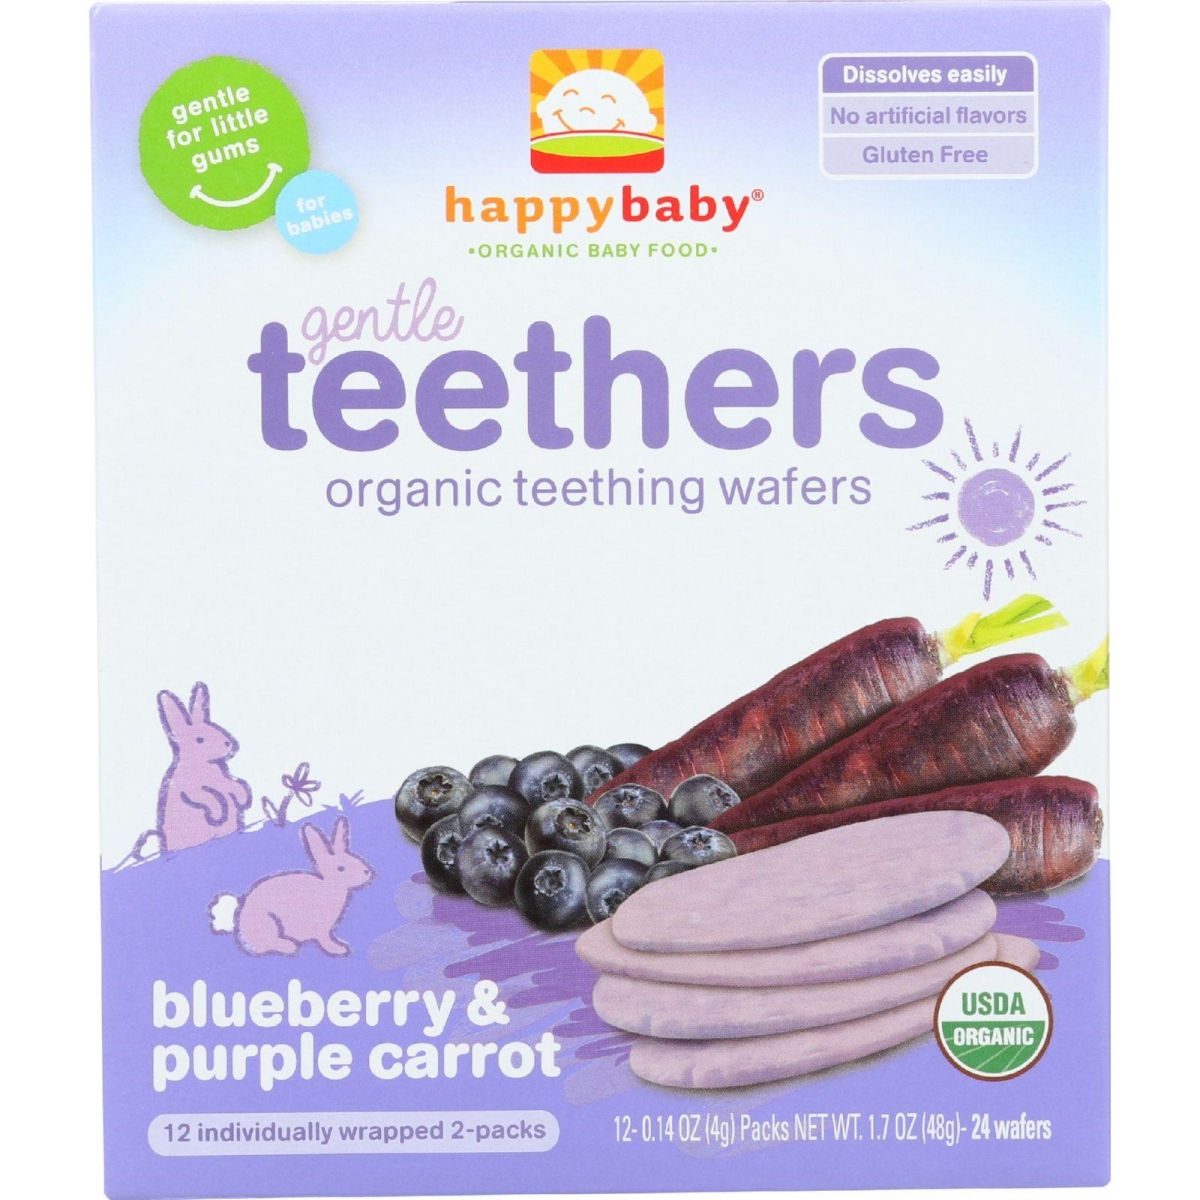 Hg1624246 1.7 Oz Organic Gentle Teethers - Blueberry & Purple Carrot, Case Of 6